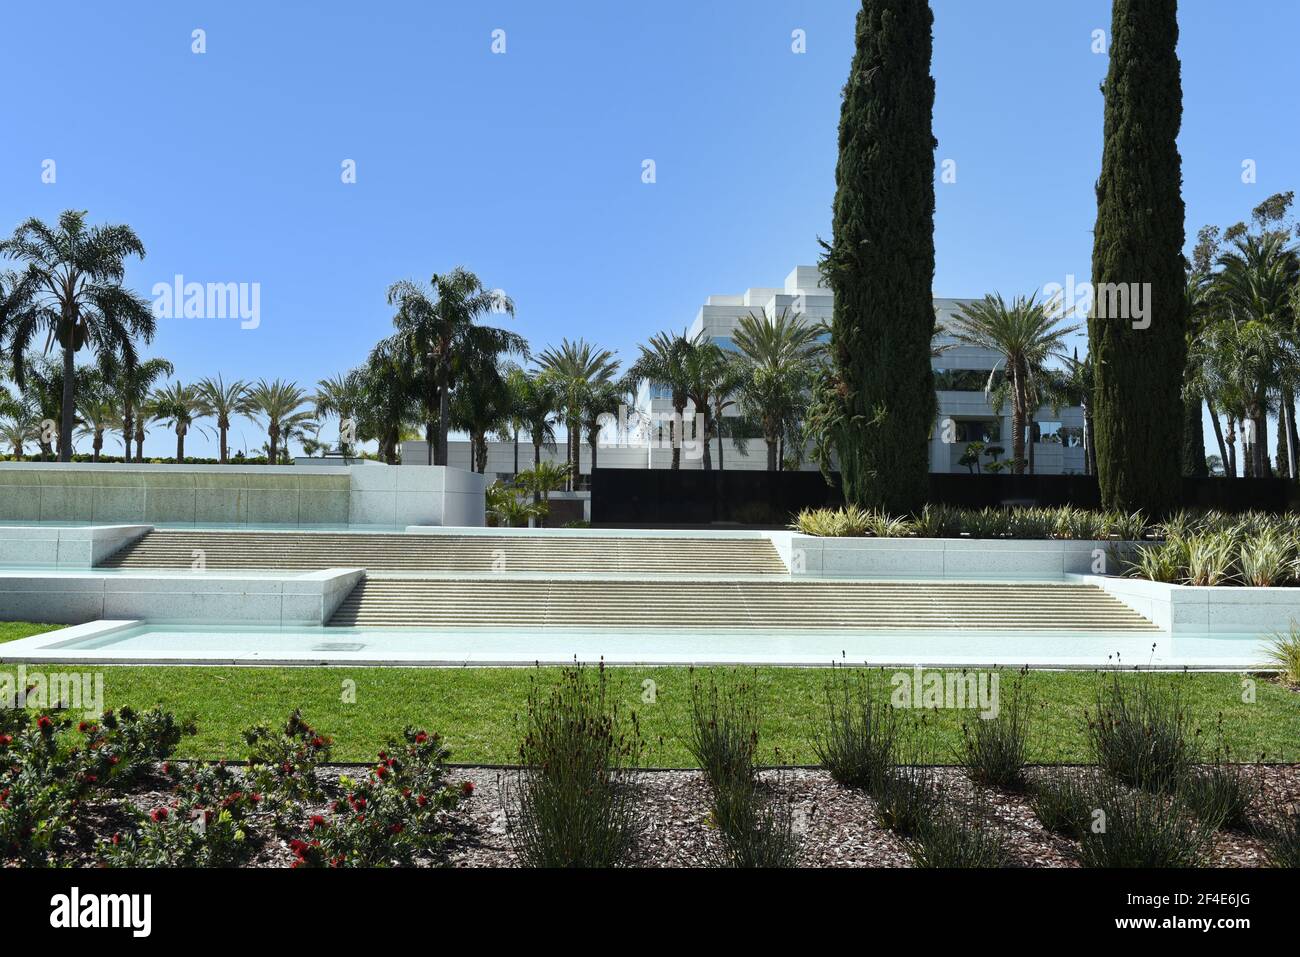 GARDEN GROVE, CALIFORNIA - 20 MAR 2021: Grounds at the Crystal Cathedral, with the Christ Cathedral Academy building in the background. Stock Photo